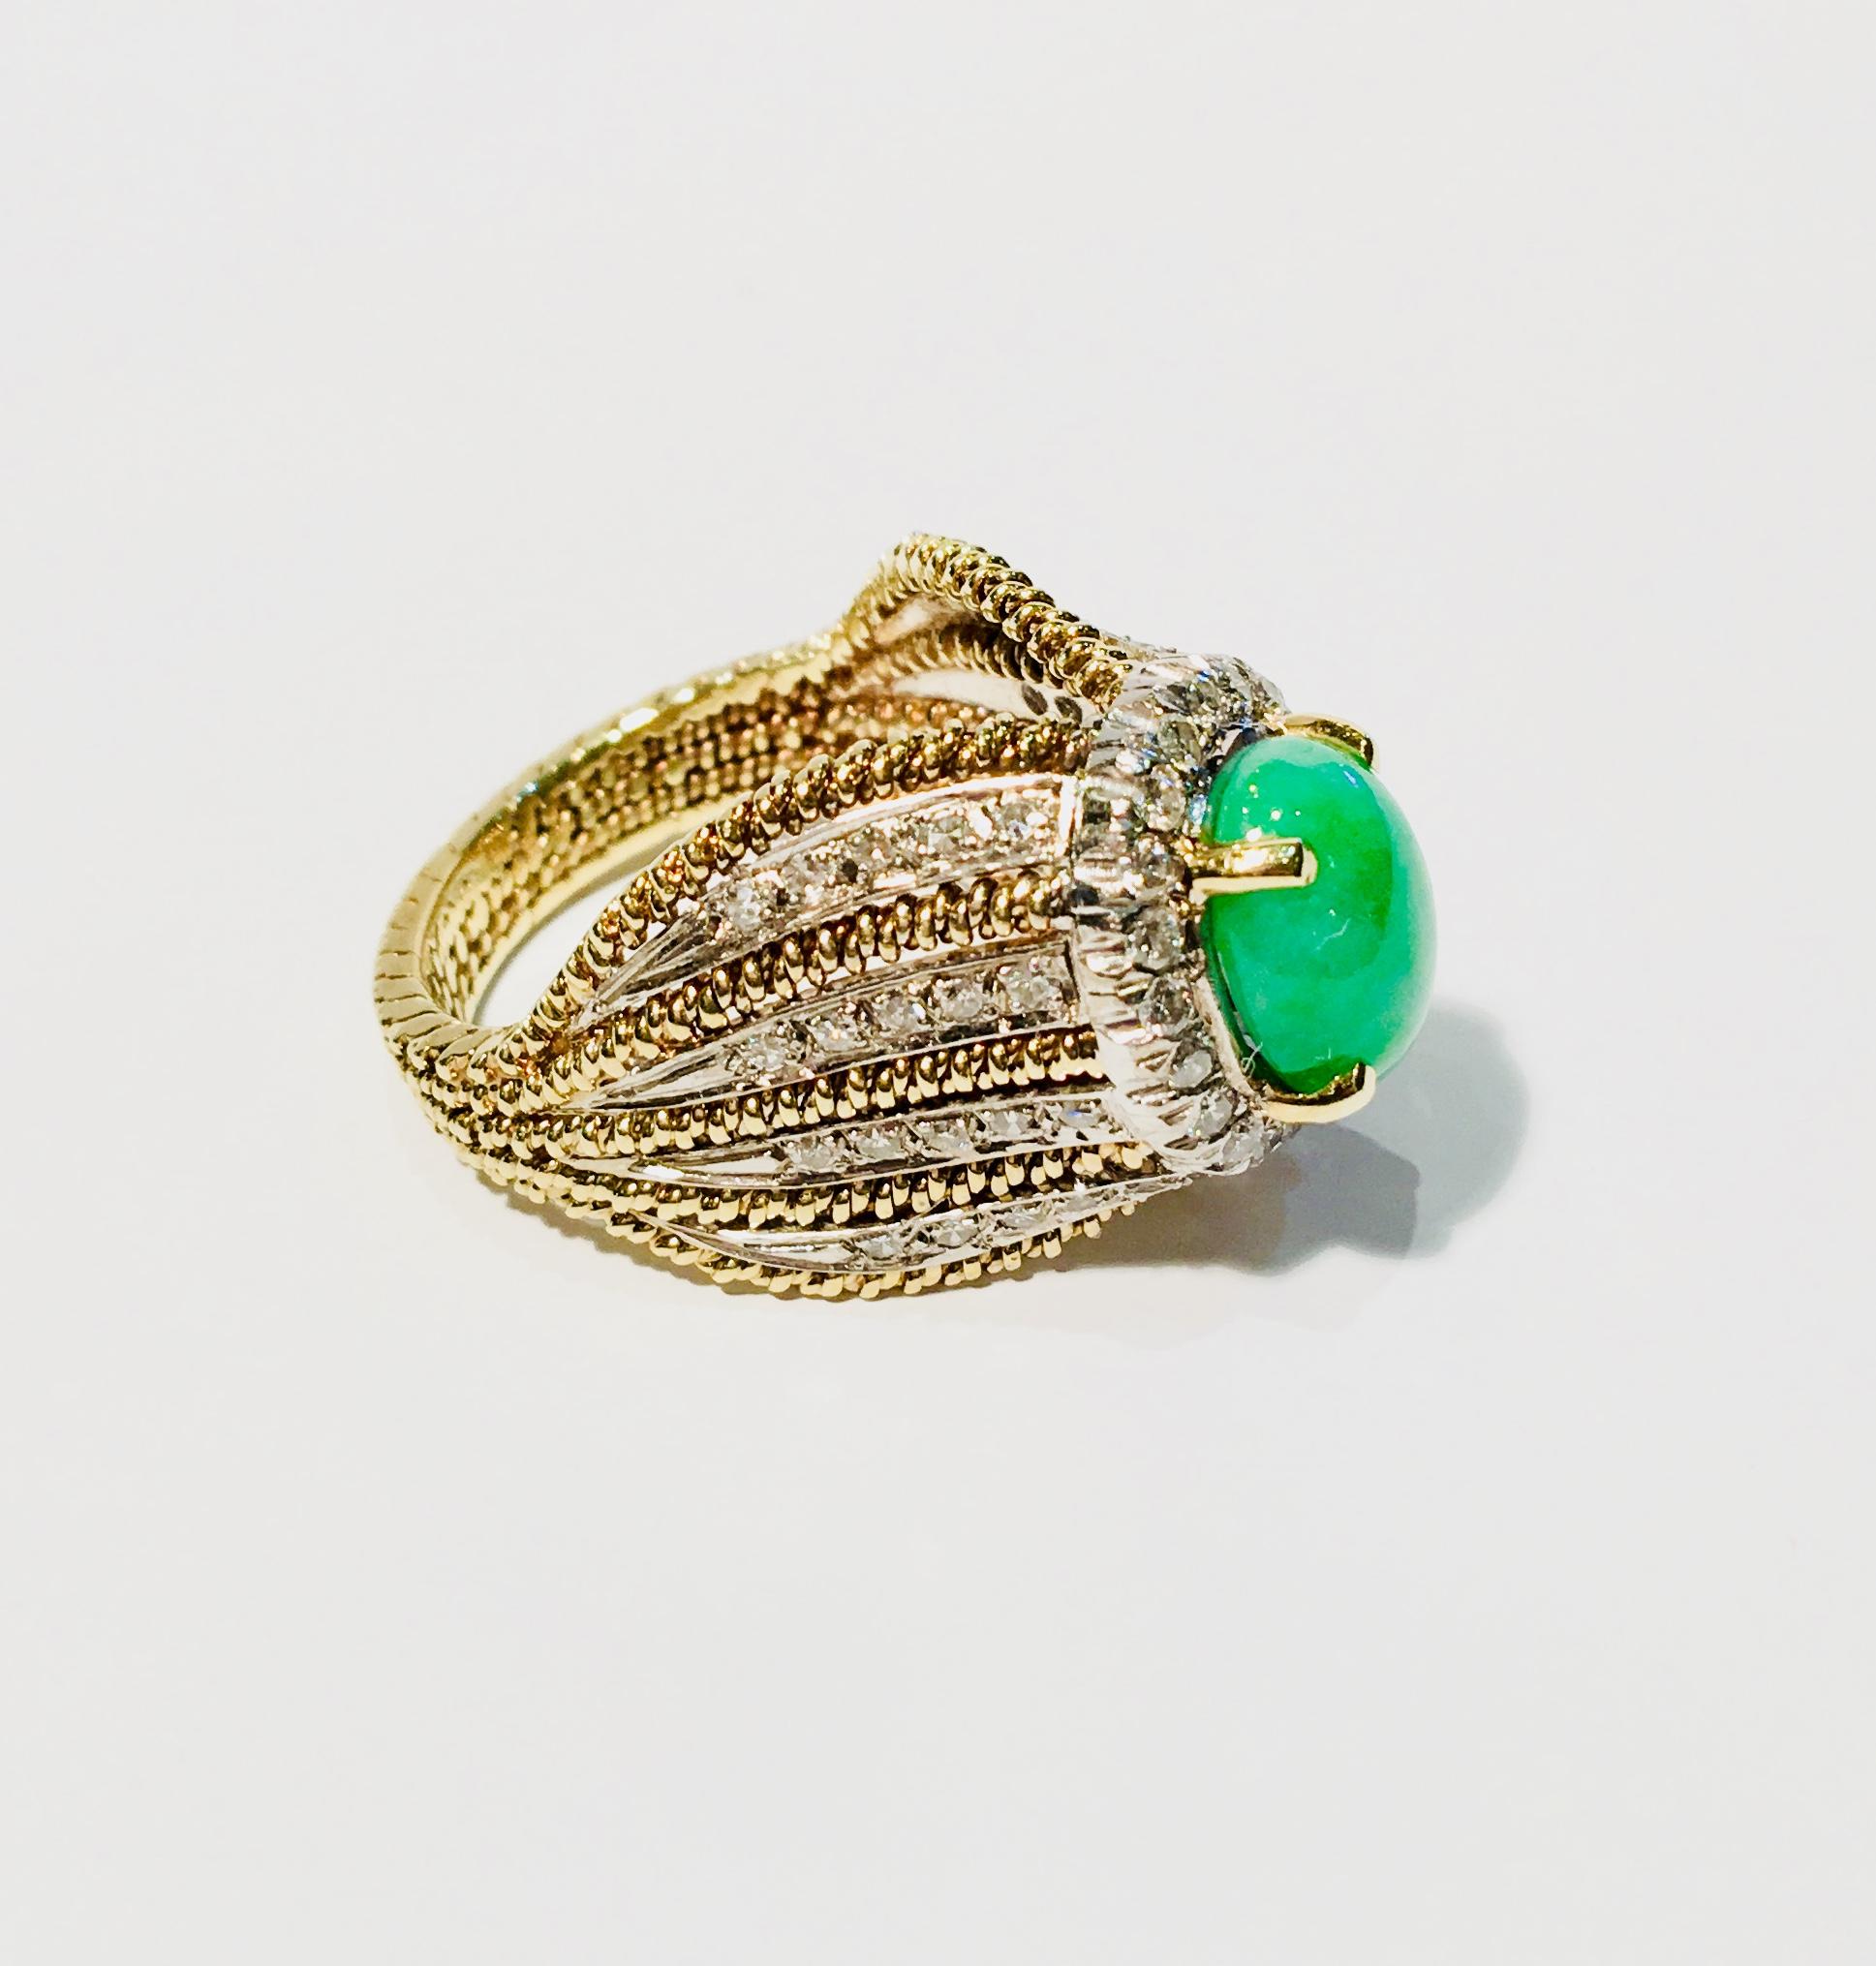 Very unique, high fashion estate ring features a bright, light apple green, variegated, oval cut jade stone, prong set and surrounded by a sparkling halo of 20 round brilliant diamonds. Elaborate side detail features 5 ropes of 14 karat yellow gold,